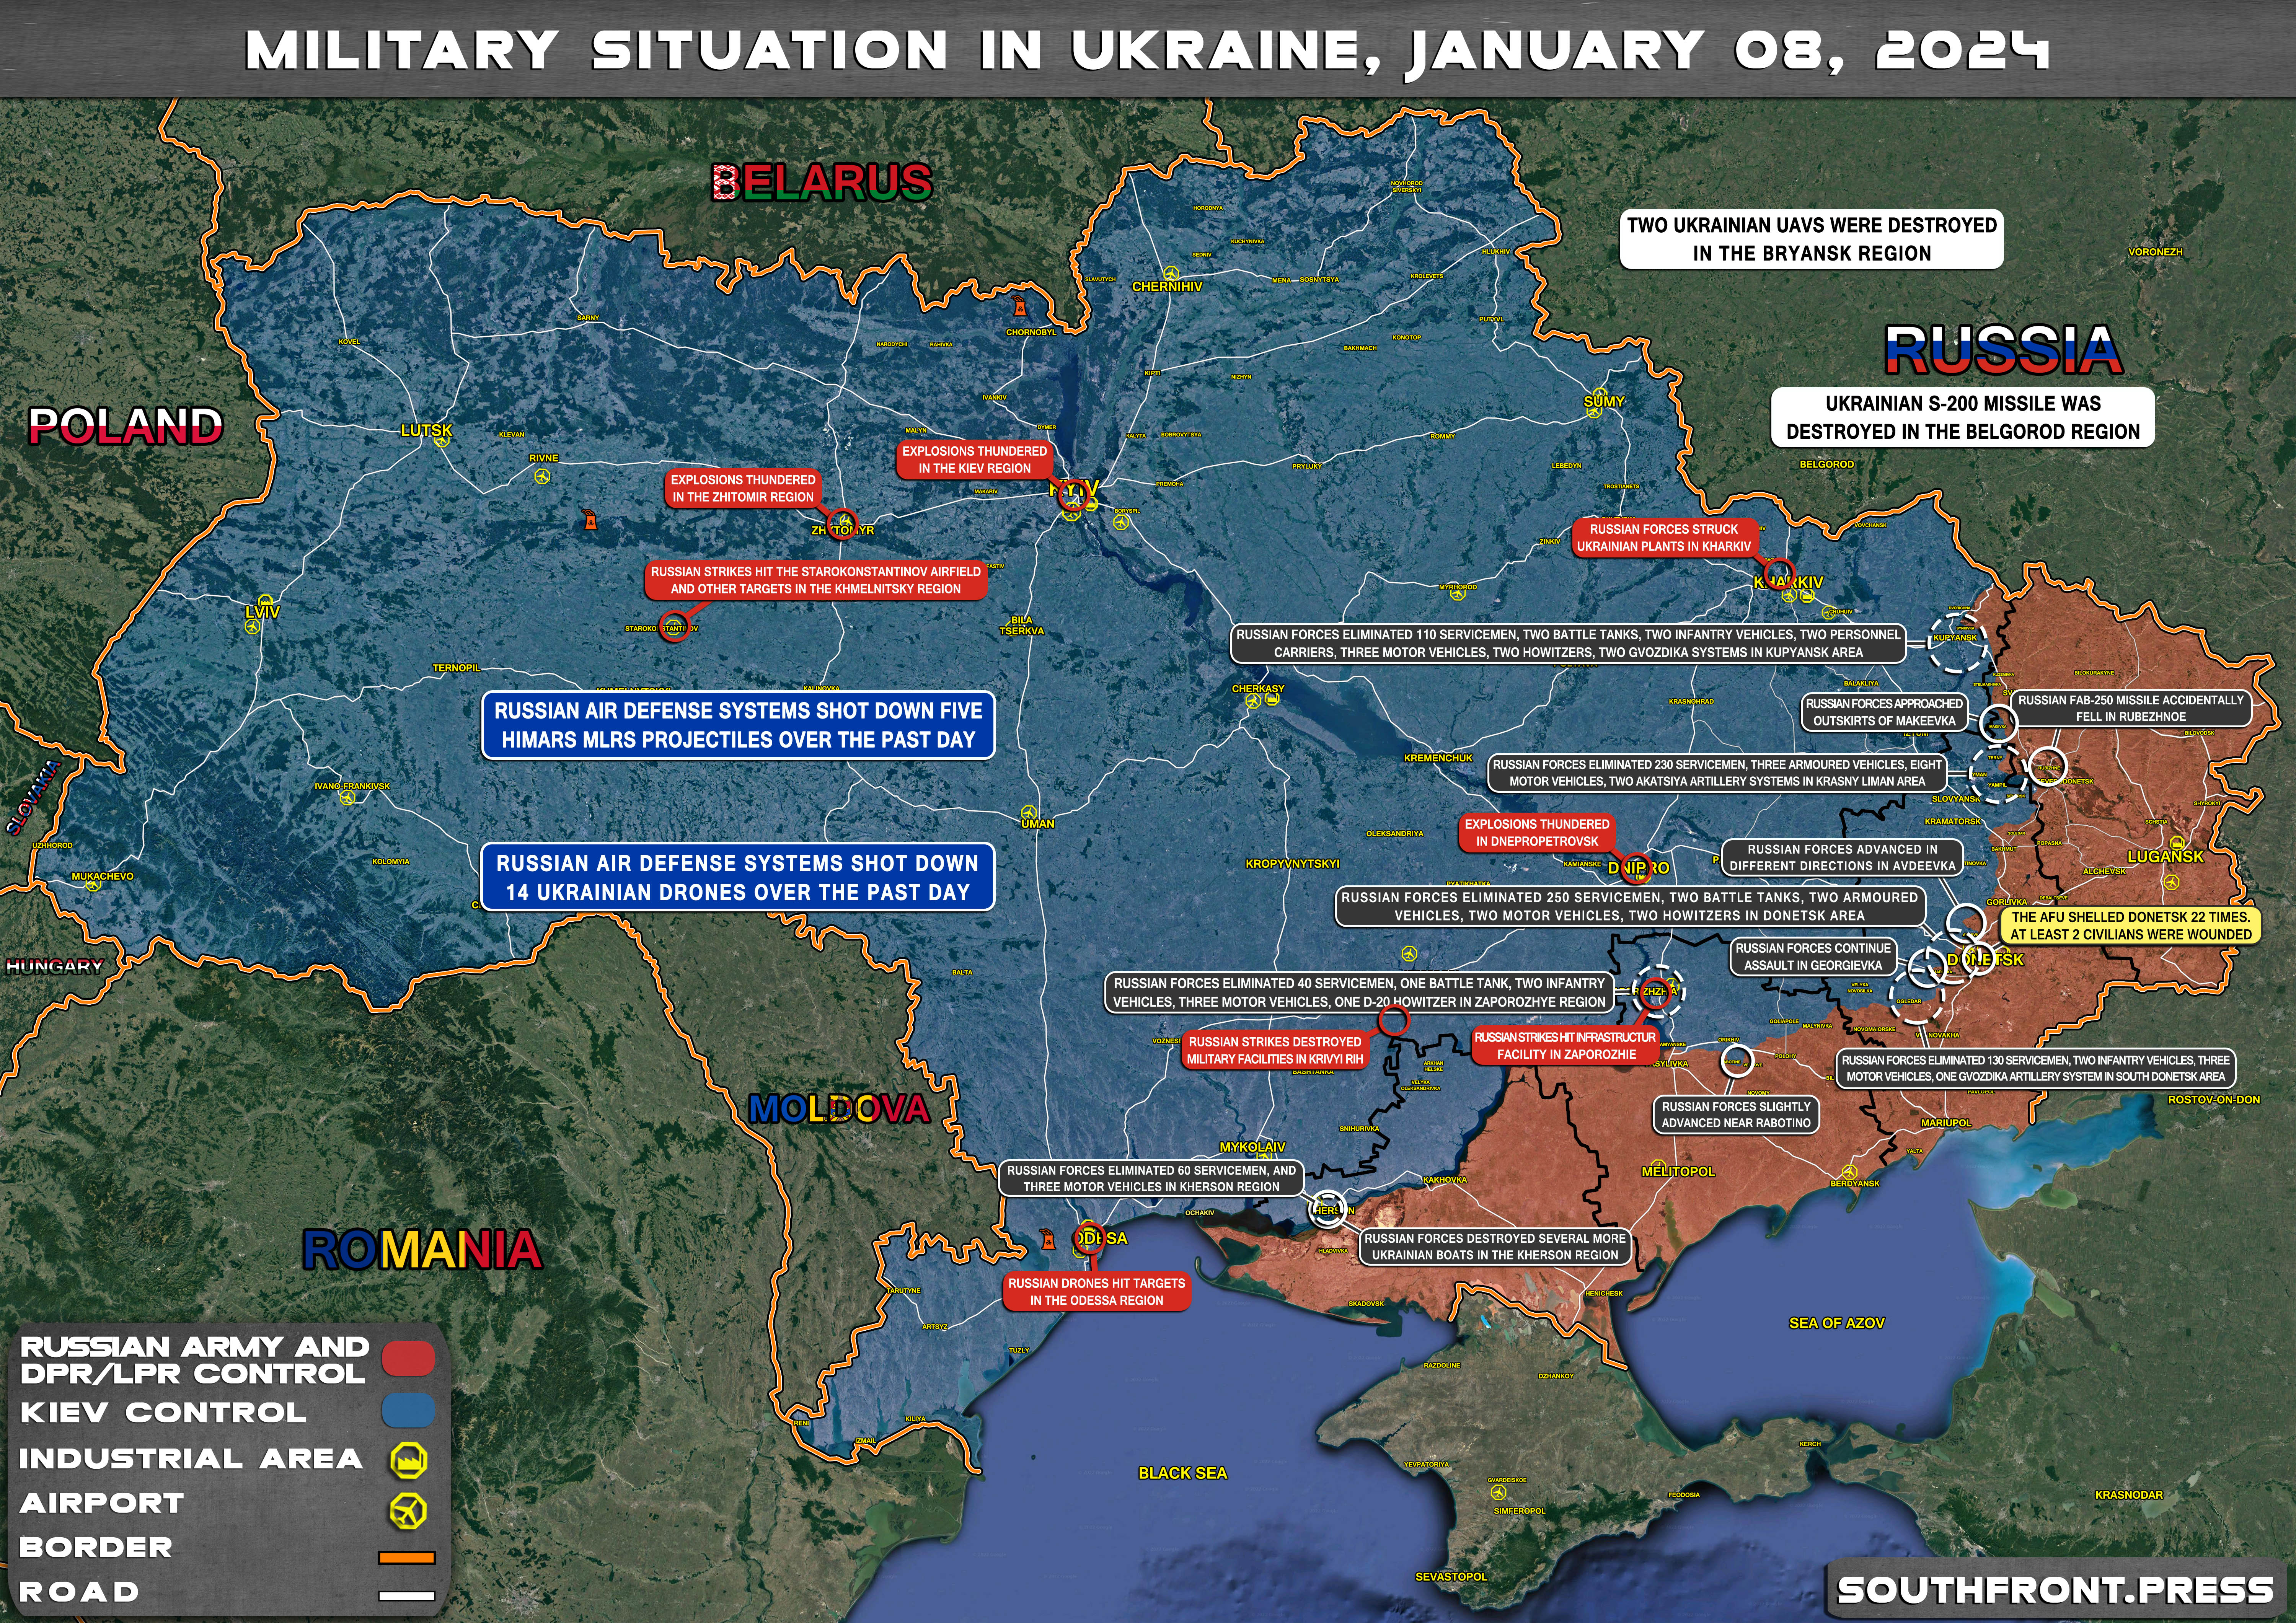 Military Overview : New Wave Of Devastating Russian Strikes Set Ukrainian Rear On Fire